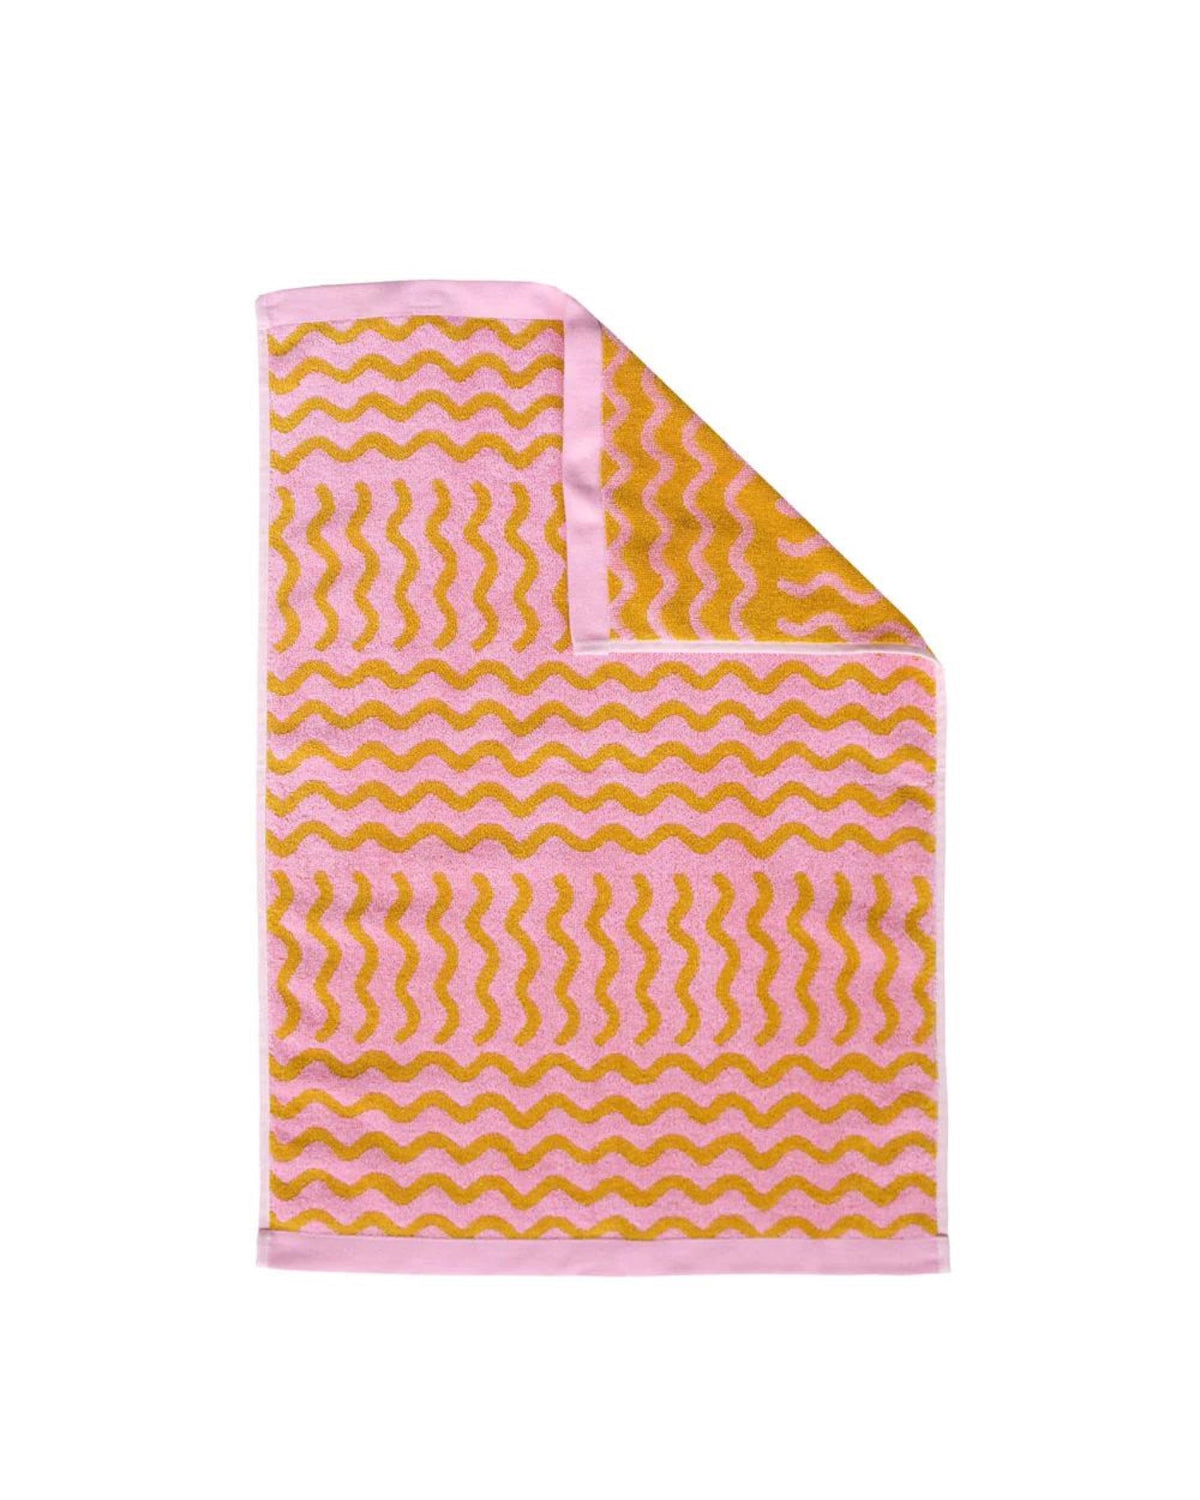 Have a little fun in your bathroom with the Ripple hand towel. Designed with movement in mind, the pink and mustard tones give this graphic print a playful vibe. Designed to bring luxury into the bathroom, this ultra-plush hand towel is made from 100% organic cotton and so much fun.